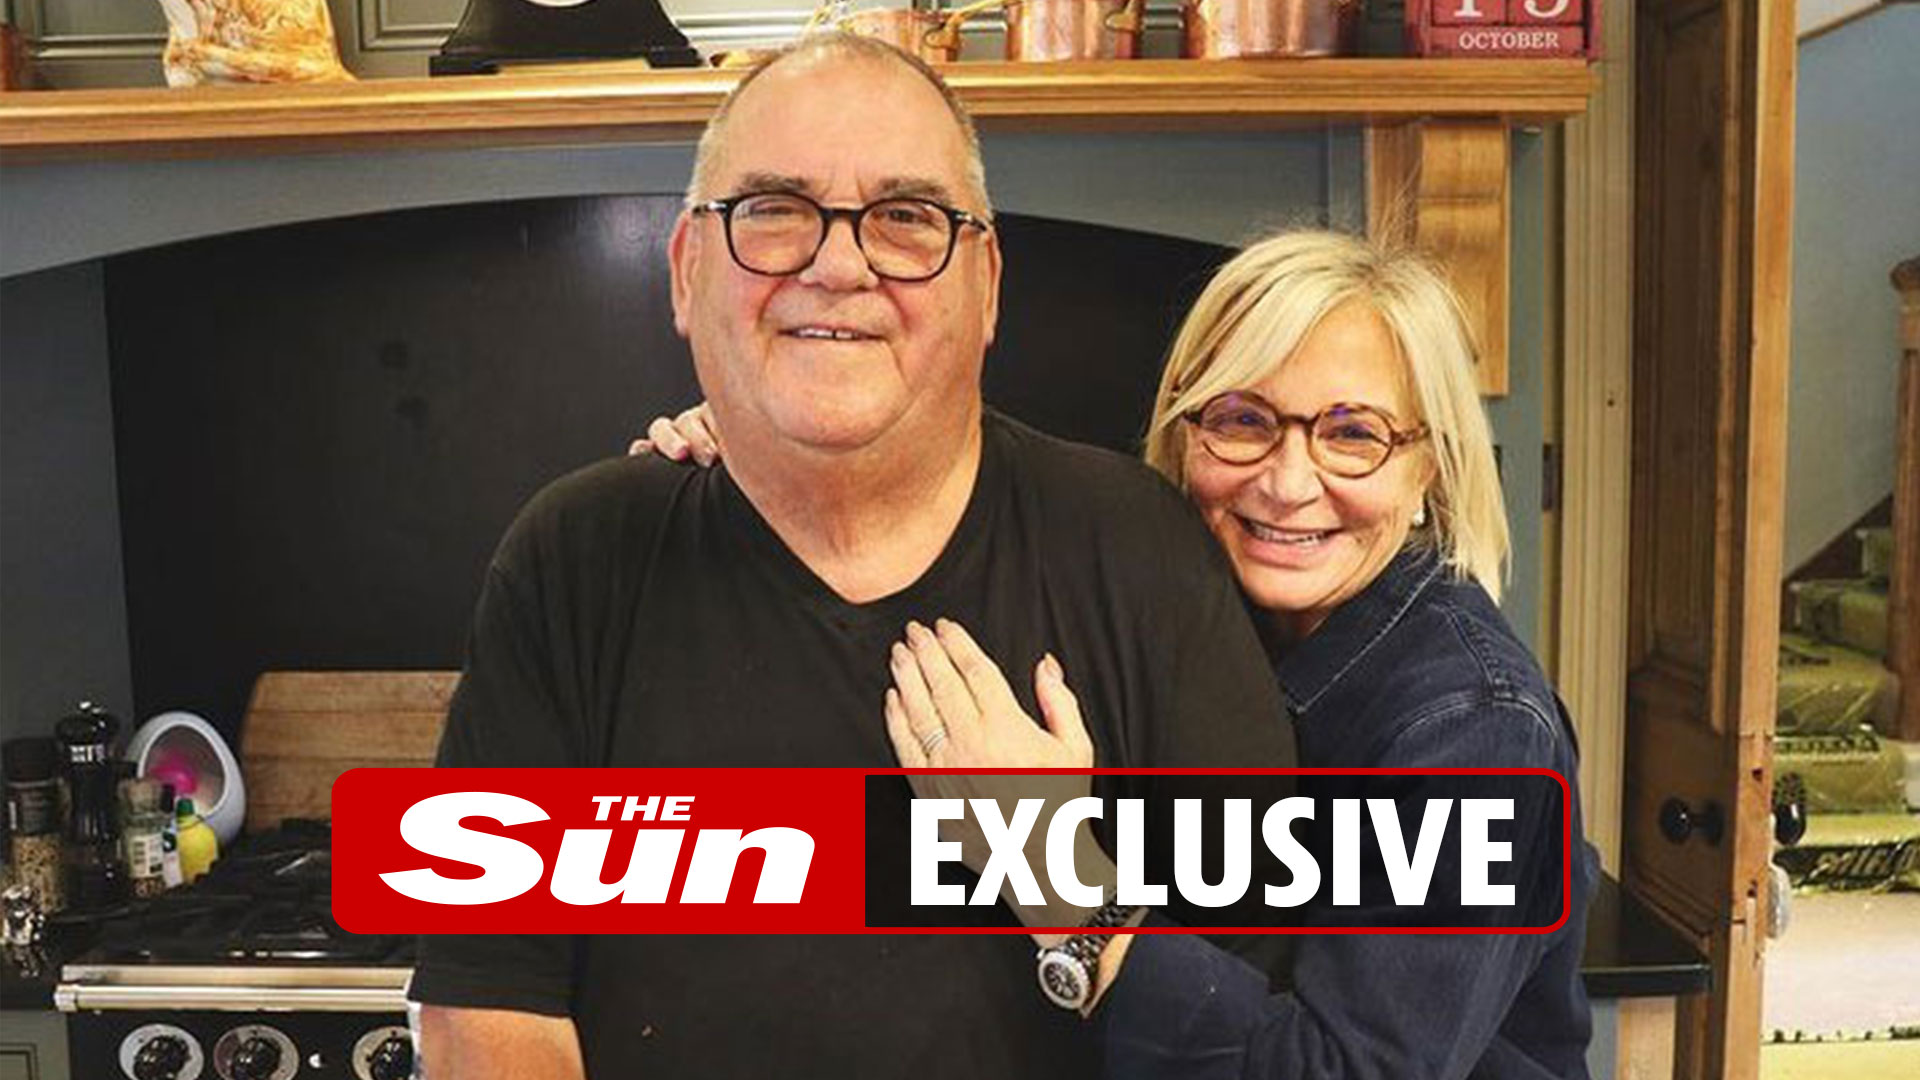 Psychic Sally Morgan was visited by ghost of late husband John through her ALEXA